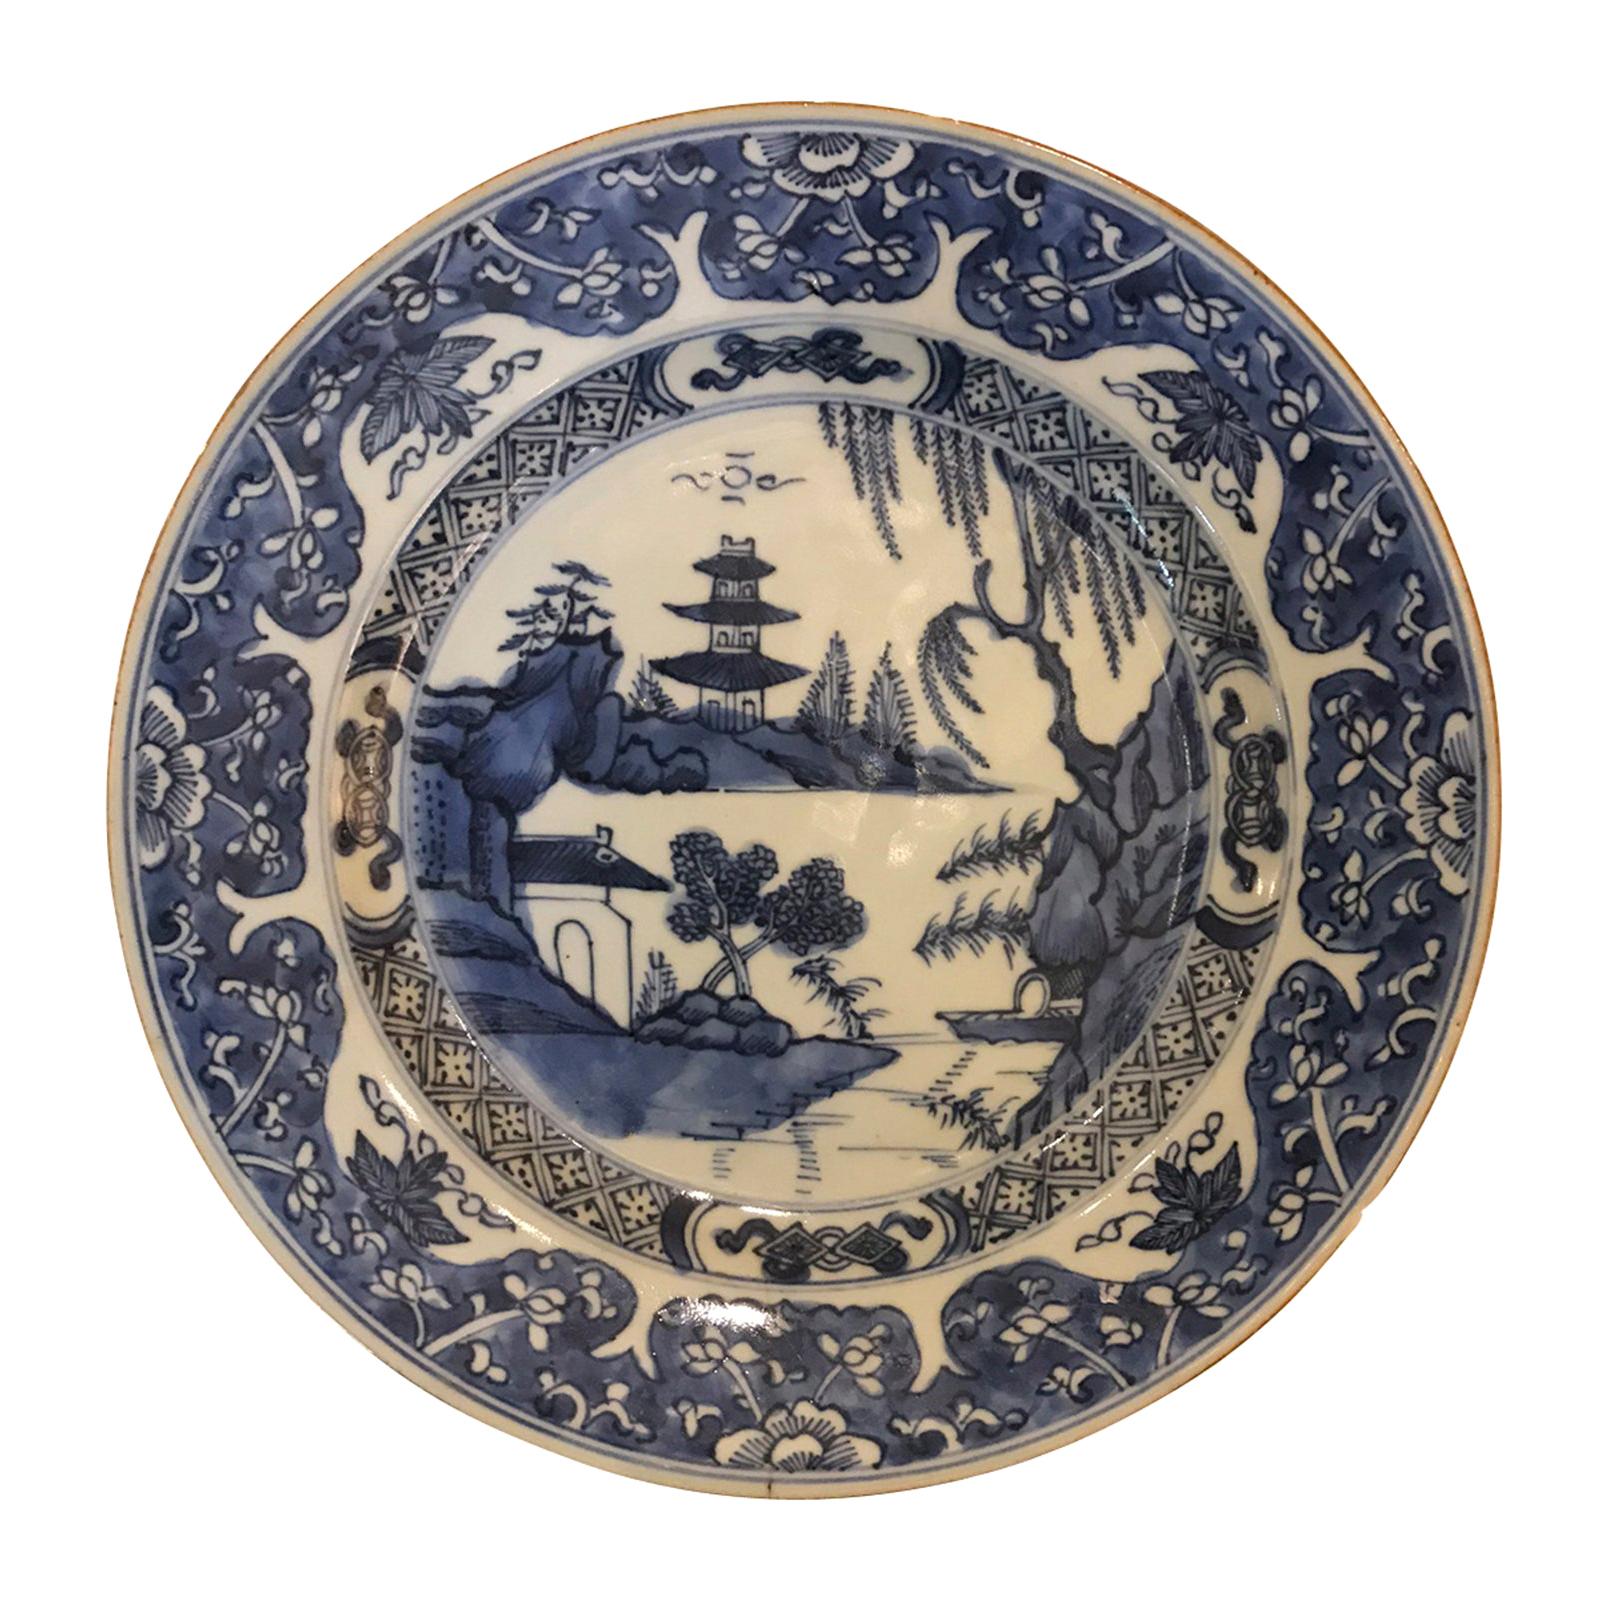 18th Century Chinese Blue and White Porcelain Plate